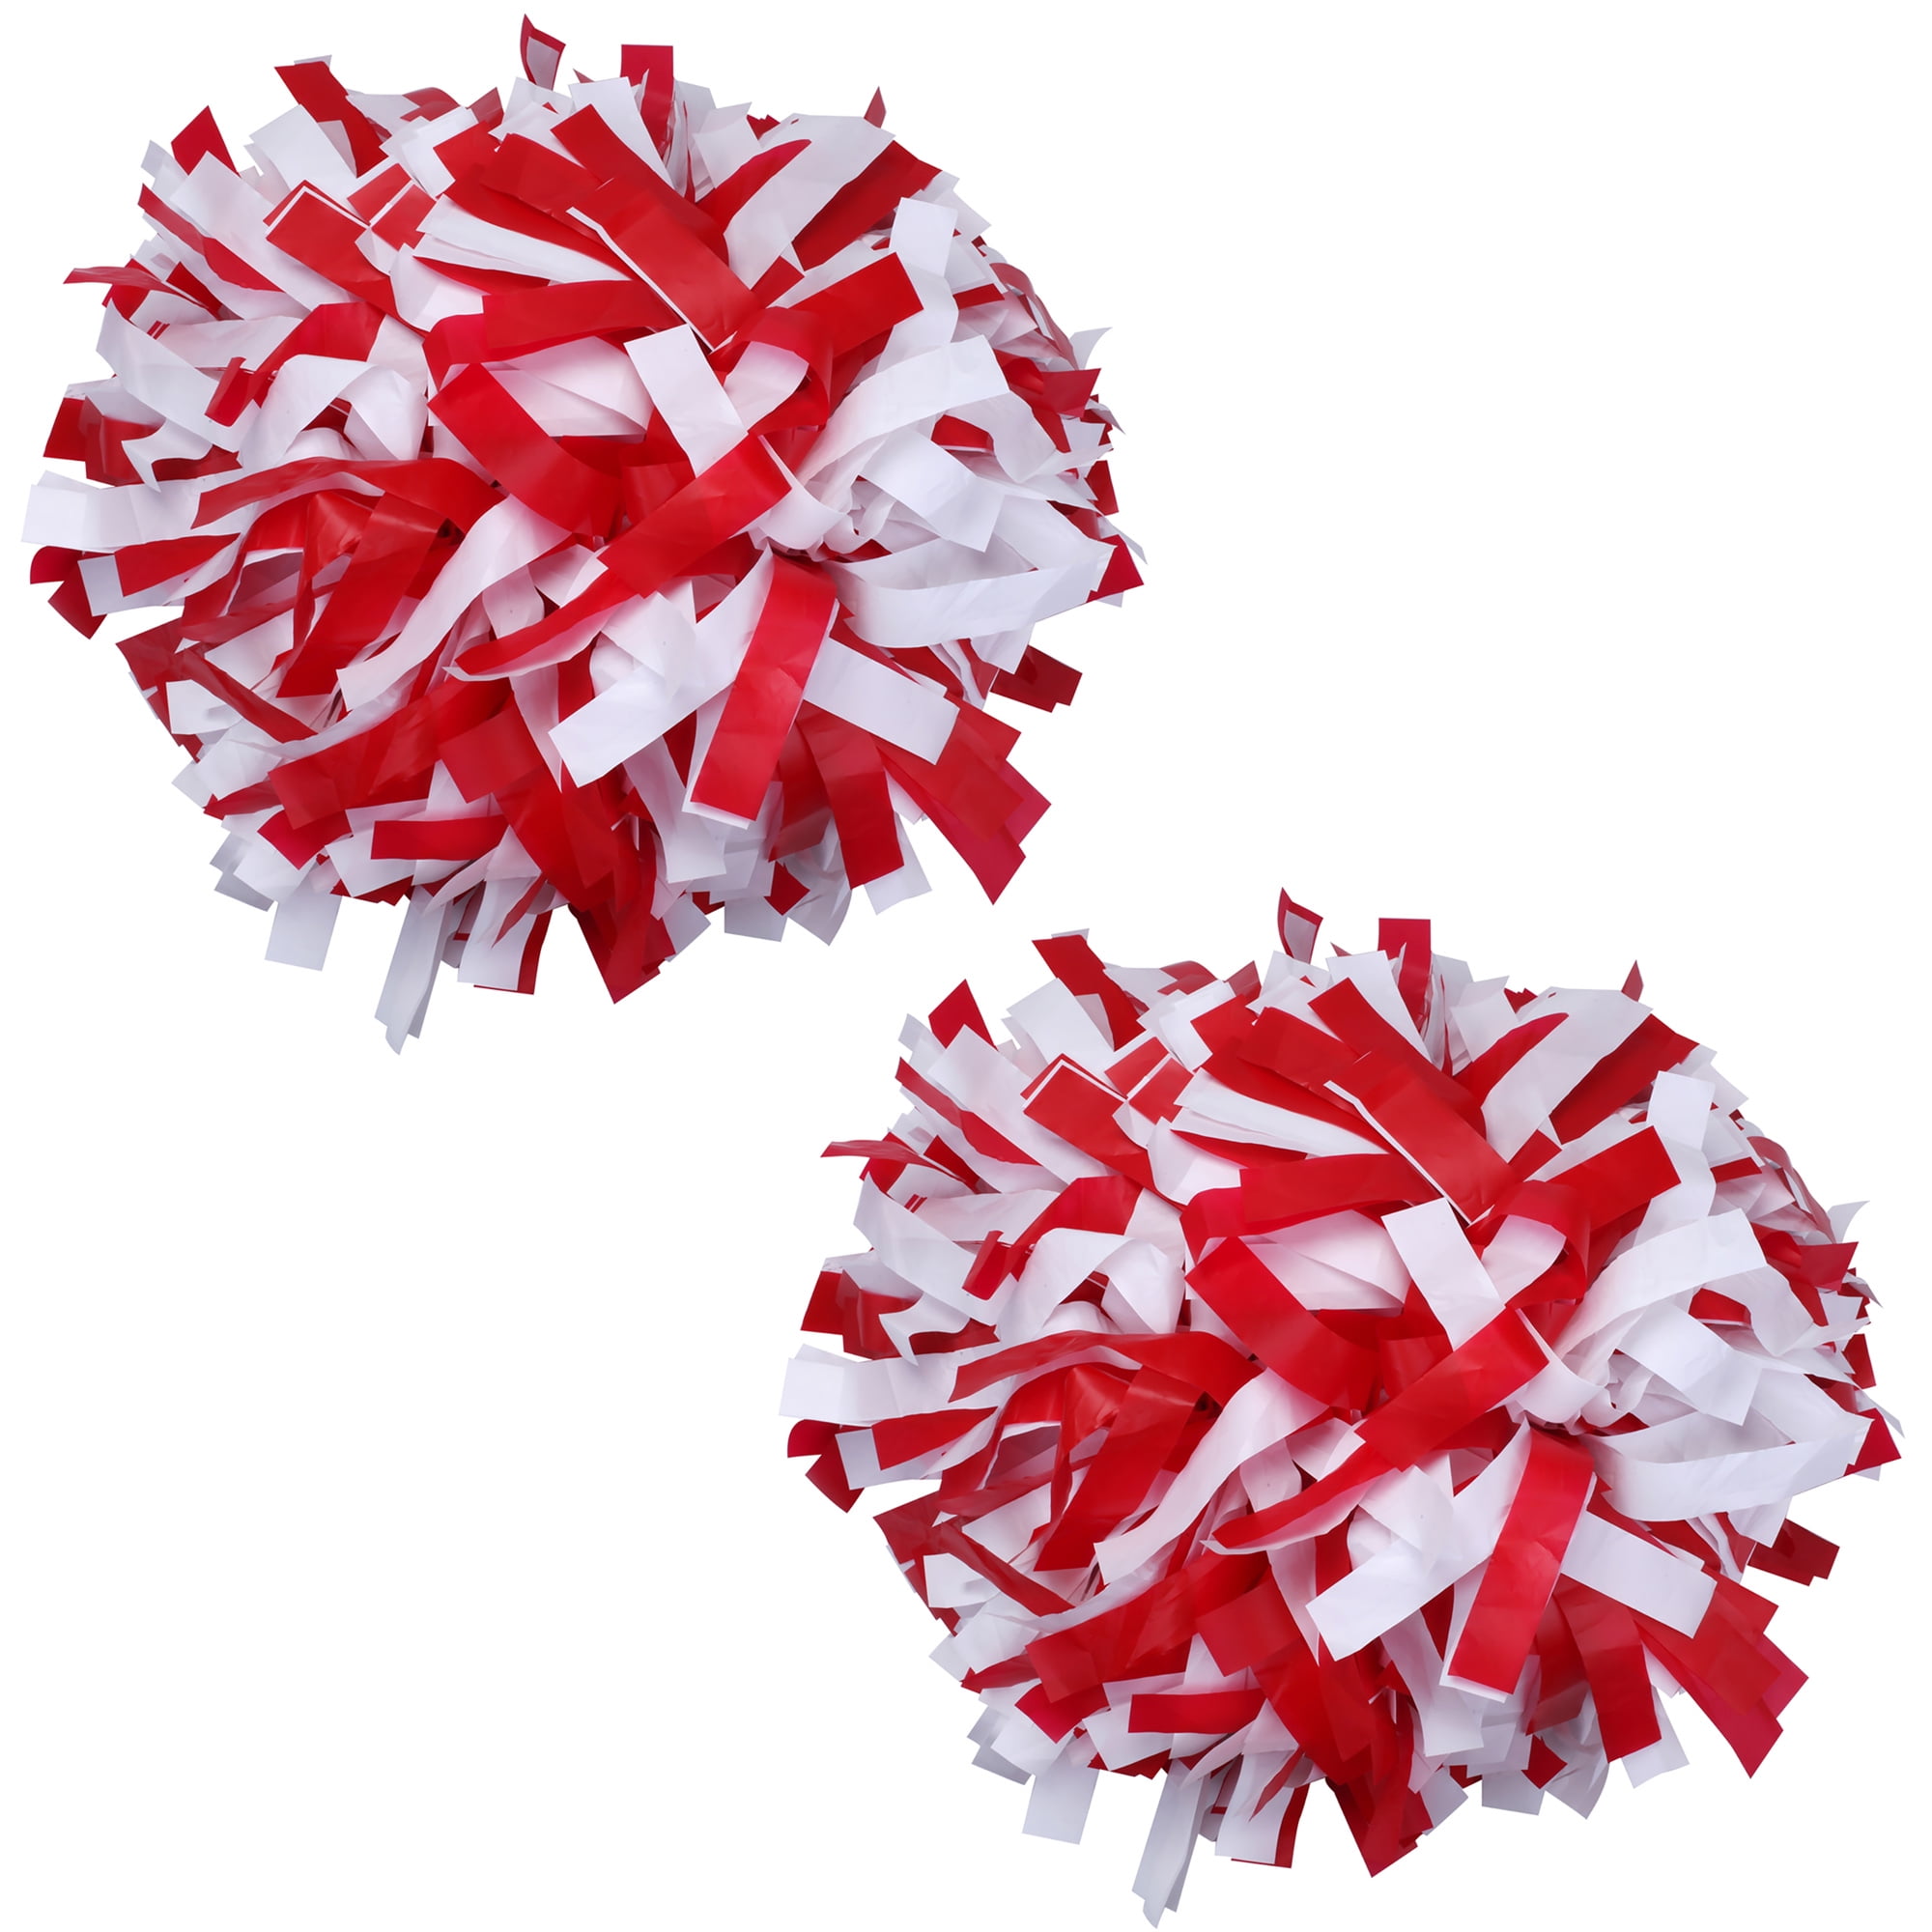 Red White And Blue Pom Poms On White Background Stock Photo